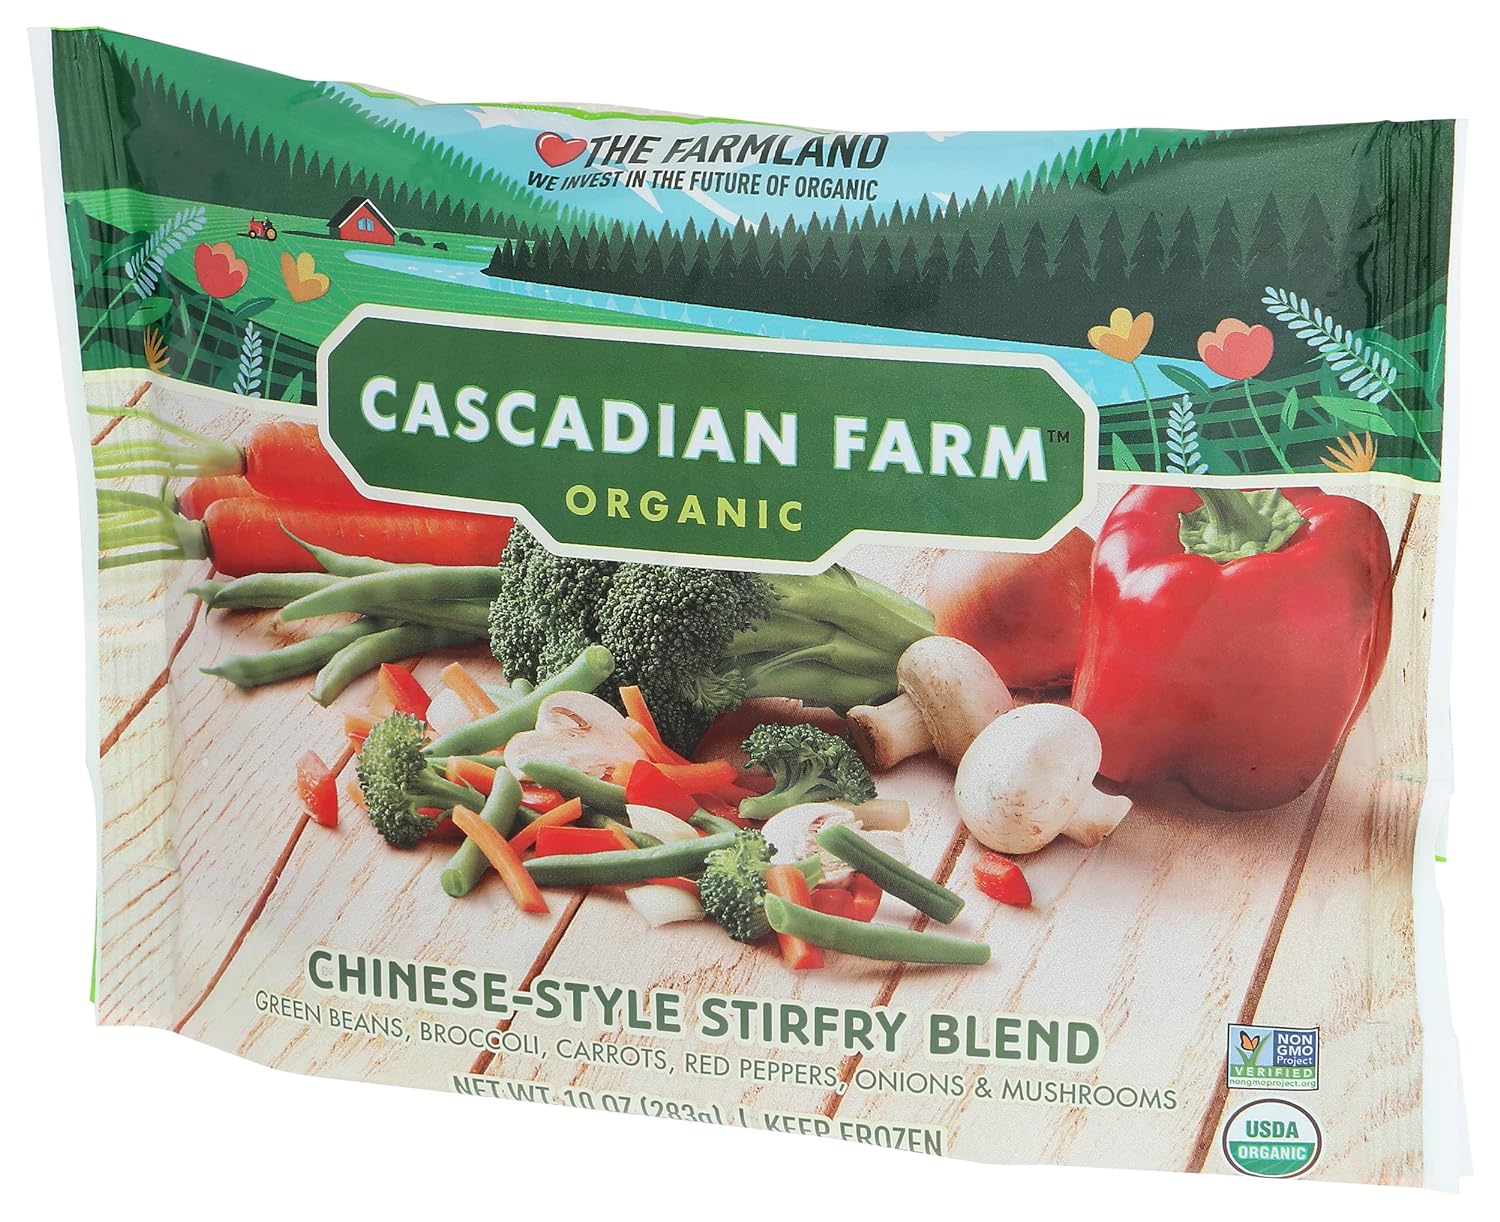 Cascadian Farm Organic Frozen Chinese-Style Stirfry Blend, Frozen Vegetables, 10 oz. : Grocery & Gourmet Food